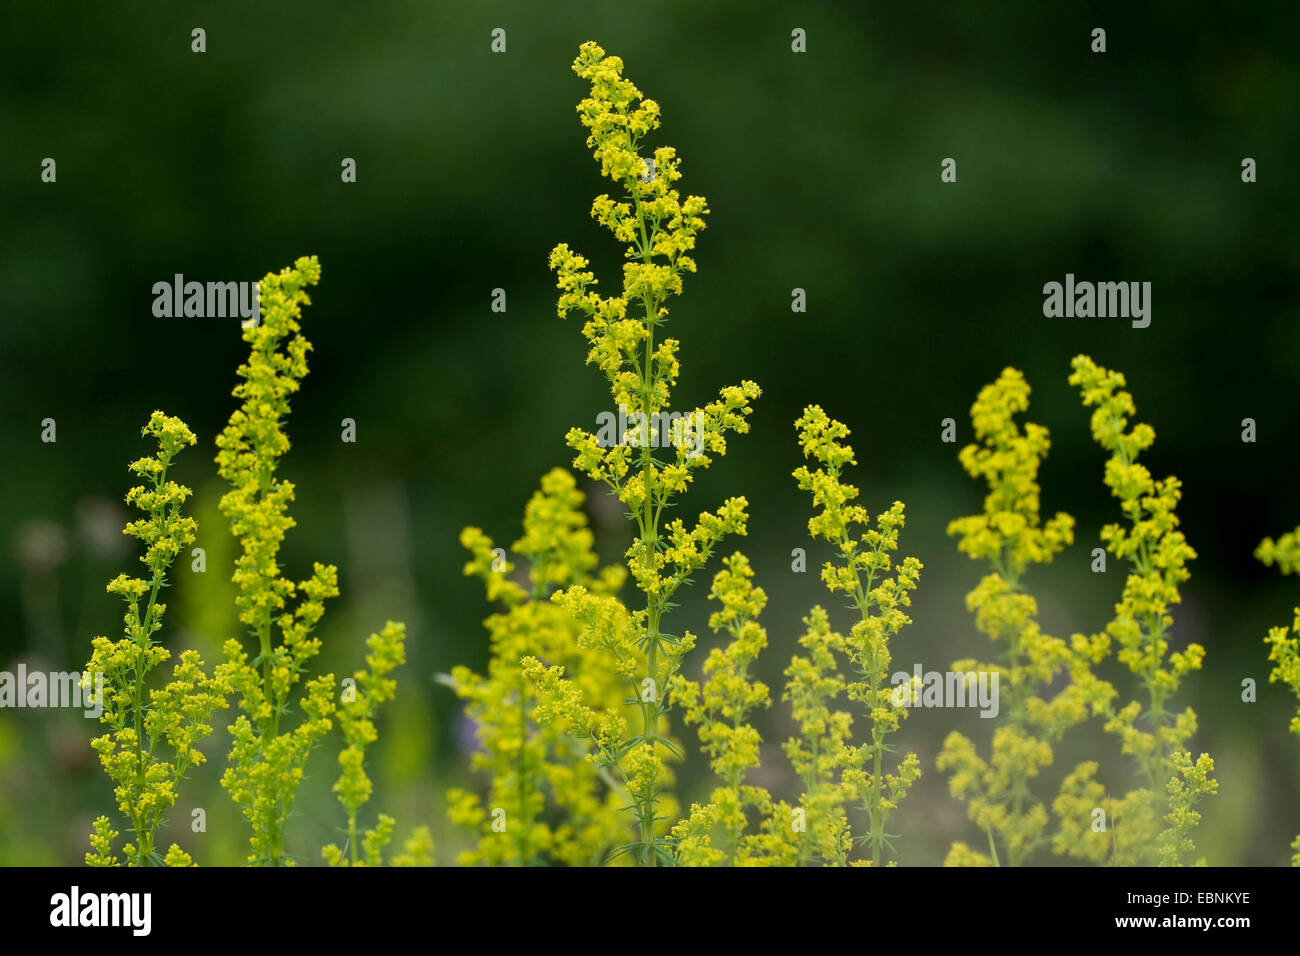 Lady's bedstraw, Yellow bedstraw, Yellow spring bedstraw (Galium verum), blooming ion a meadow, Germany Stock Photo